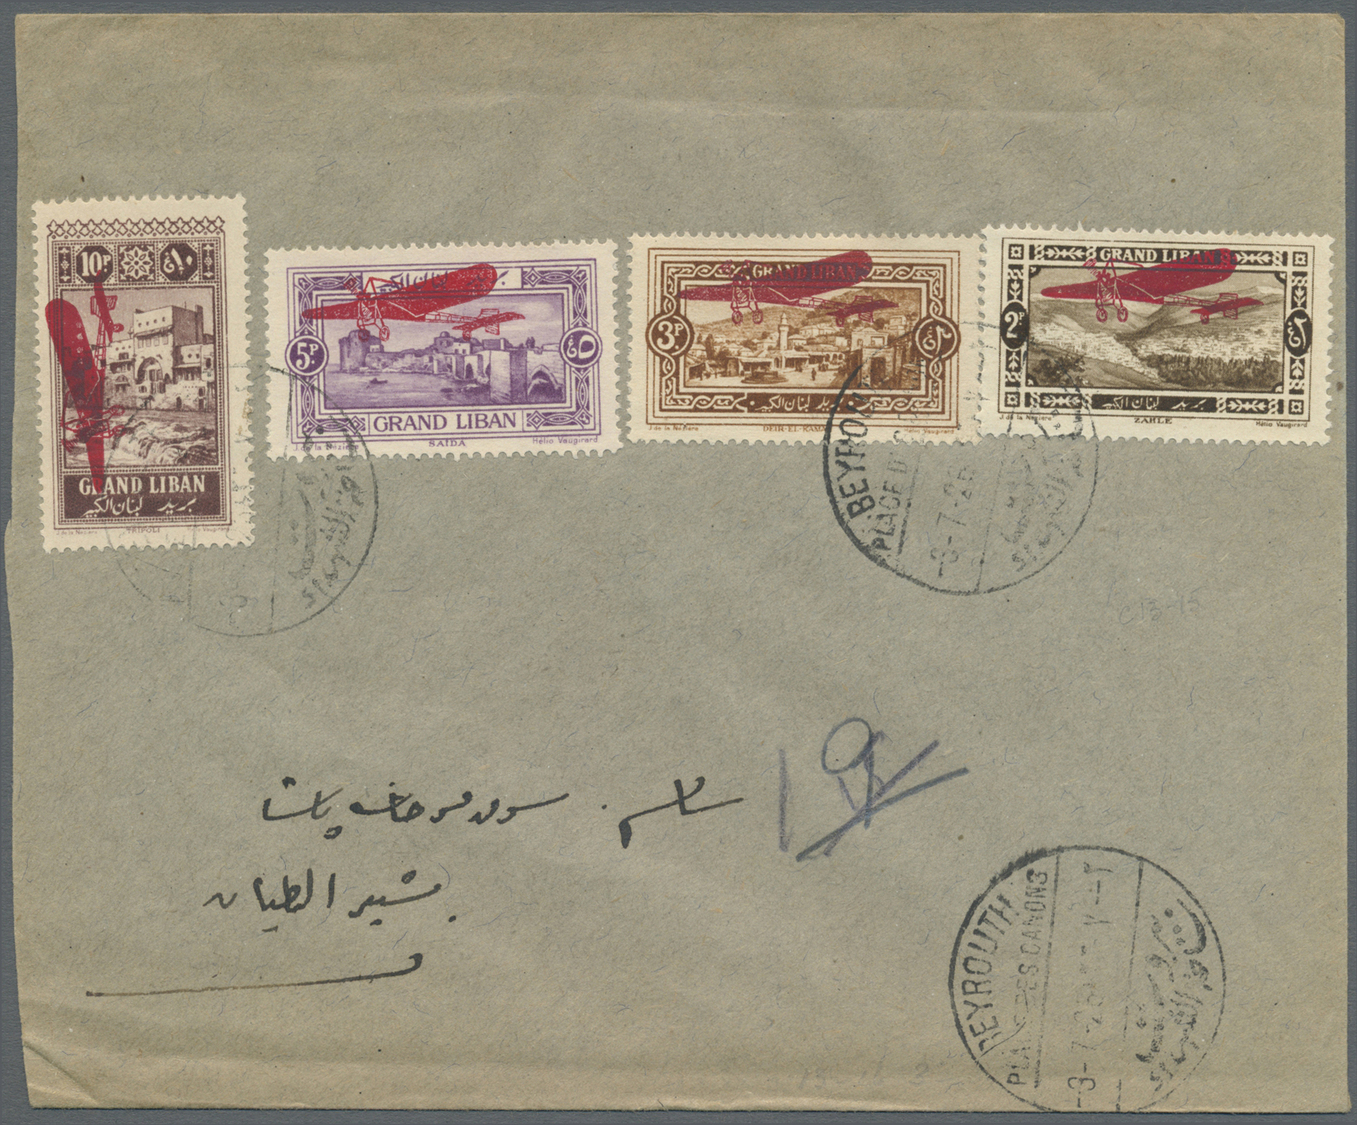 Br Libanon: 1926, Airmails, Red "Plane" Overprint, Complete Set Of Four Values, Attractive Franking On Cover From "BEYRO - Liban